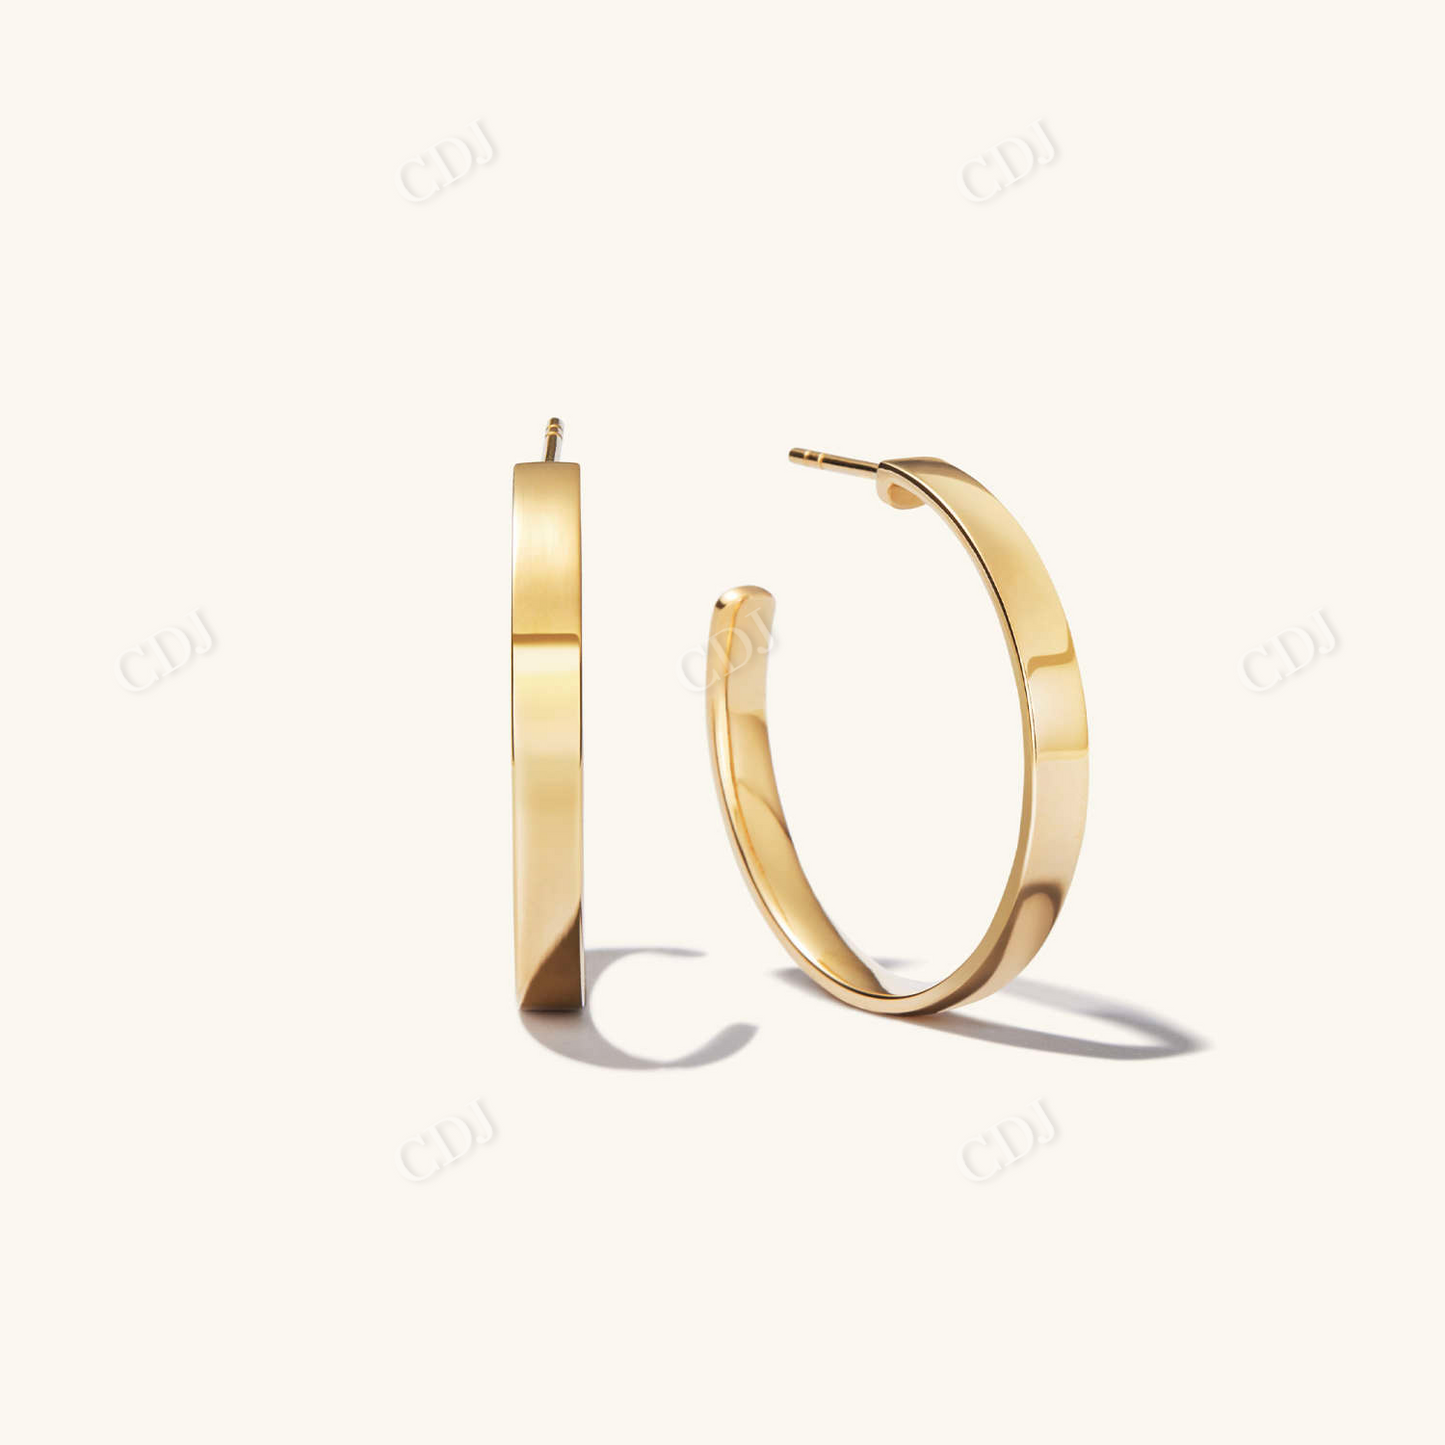 Best Everyday Gold Hoops Earrings  customdiamjewel 10 KT Solid Gold Yellow Gold 